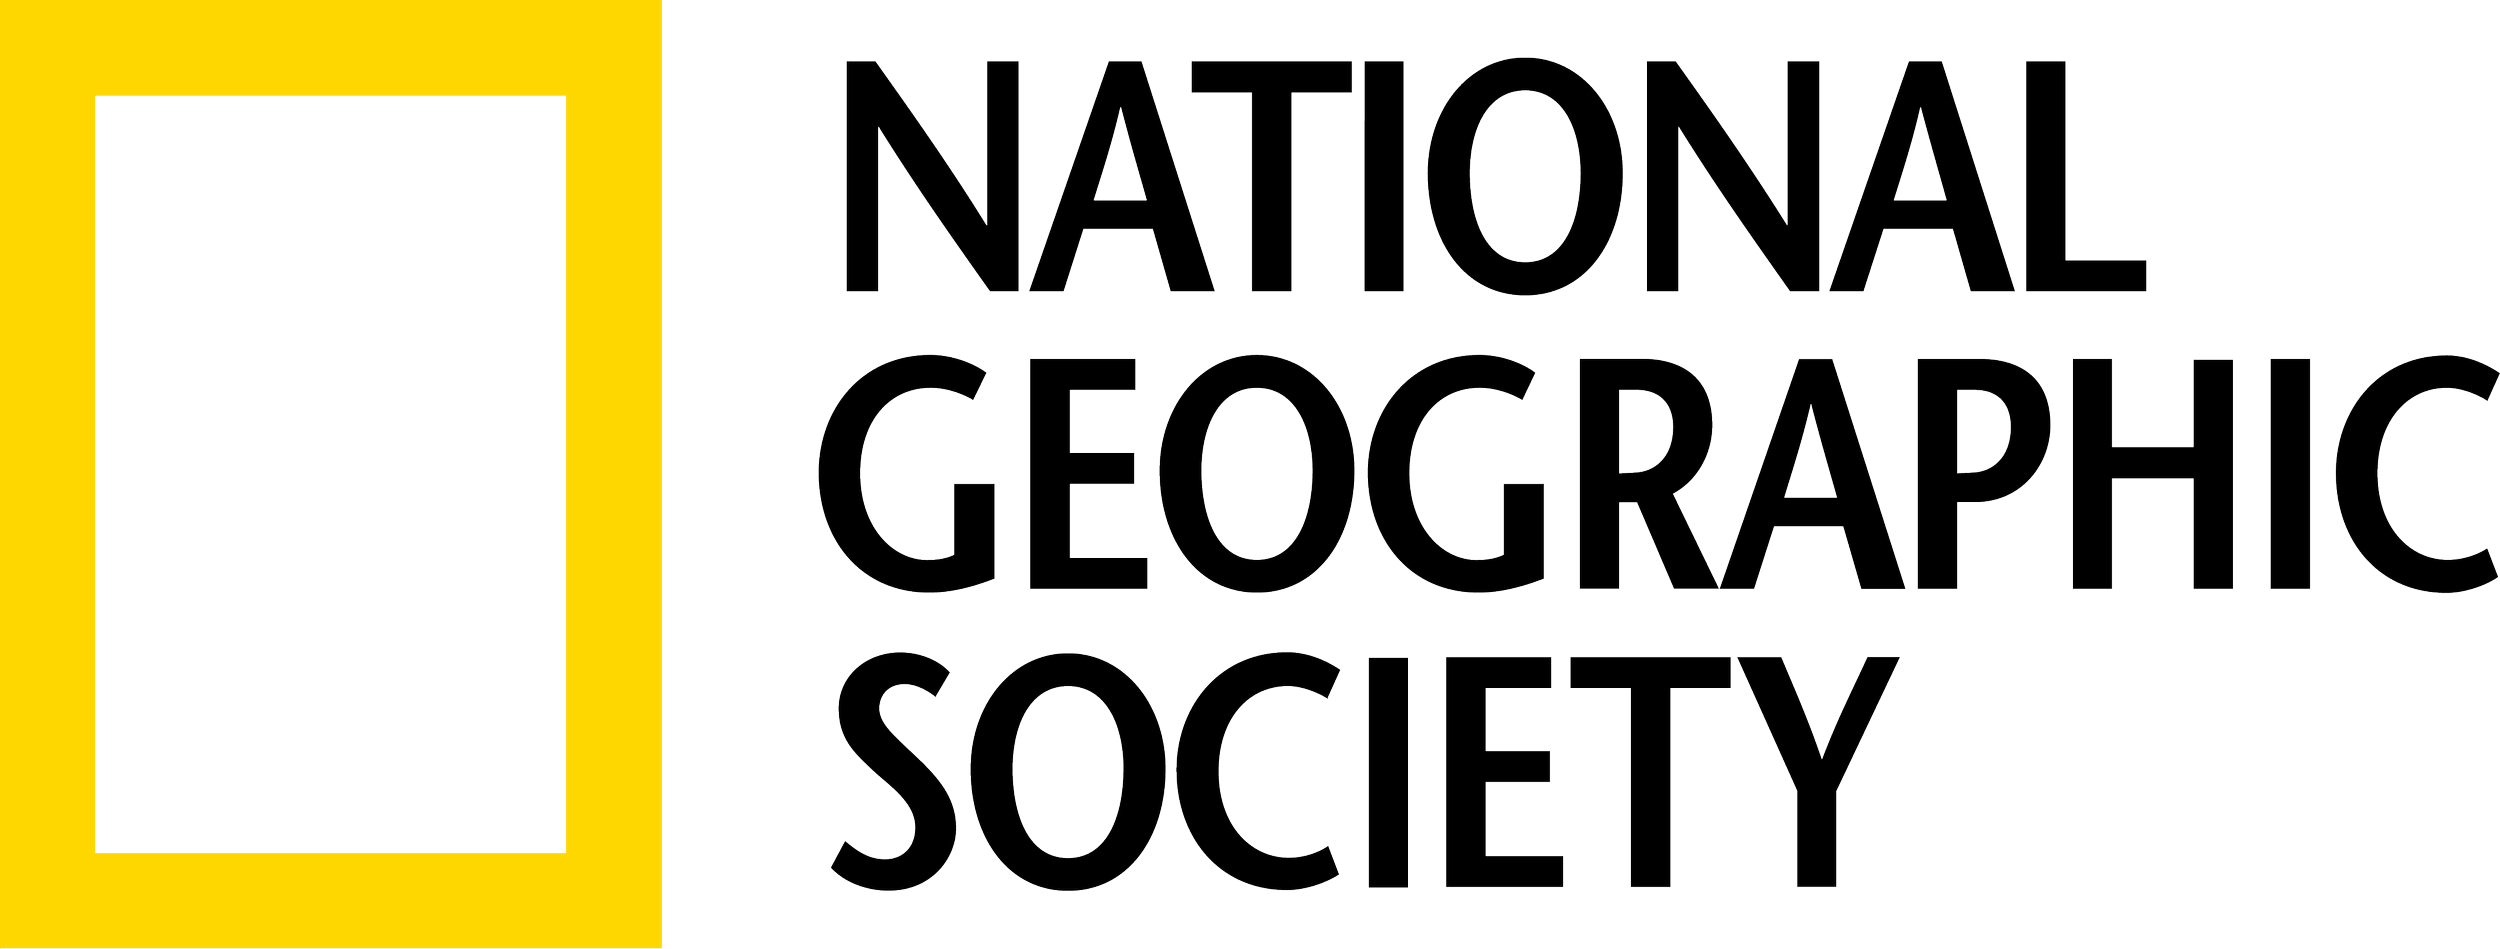 National_Geographic_Society_logo.png